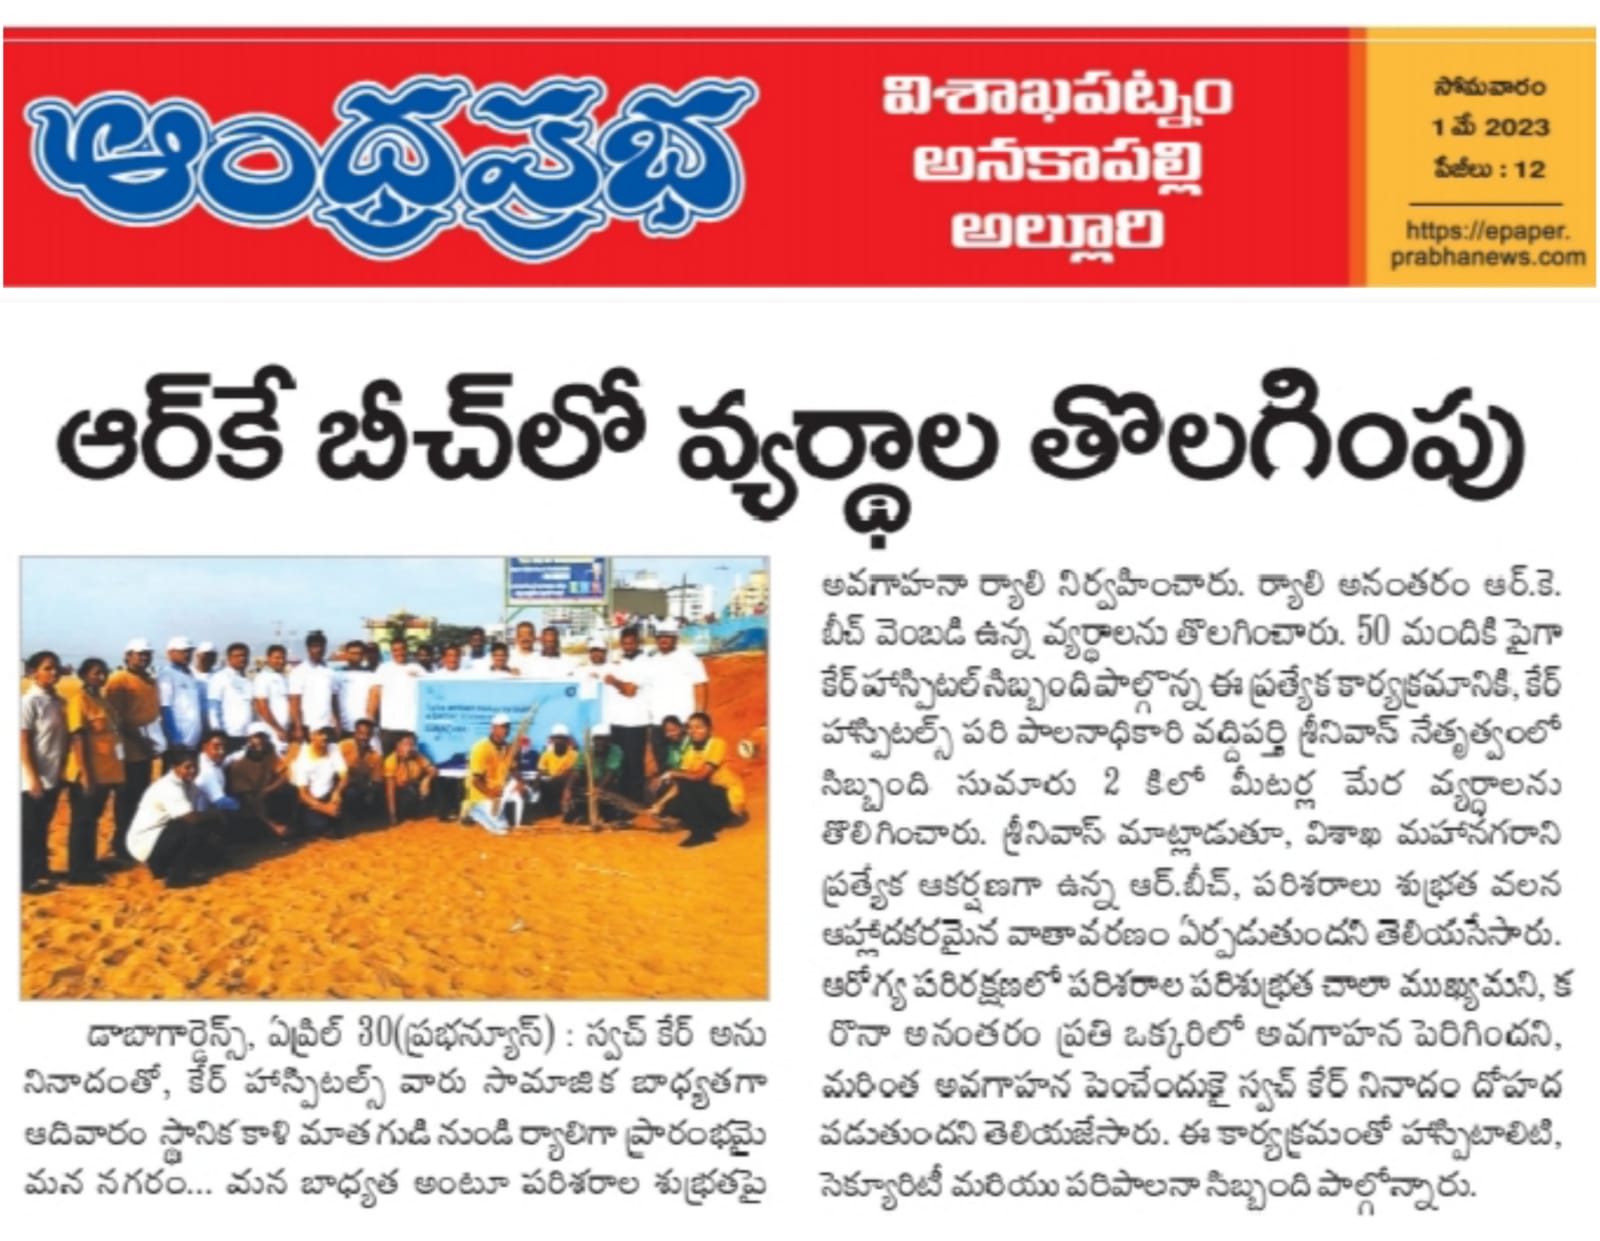 CARE Hospitals, Vizaag Performs Swach CARE Cleness Drive at News Coverage in Andhra Prabha